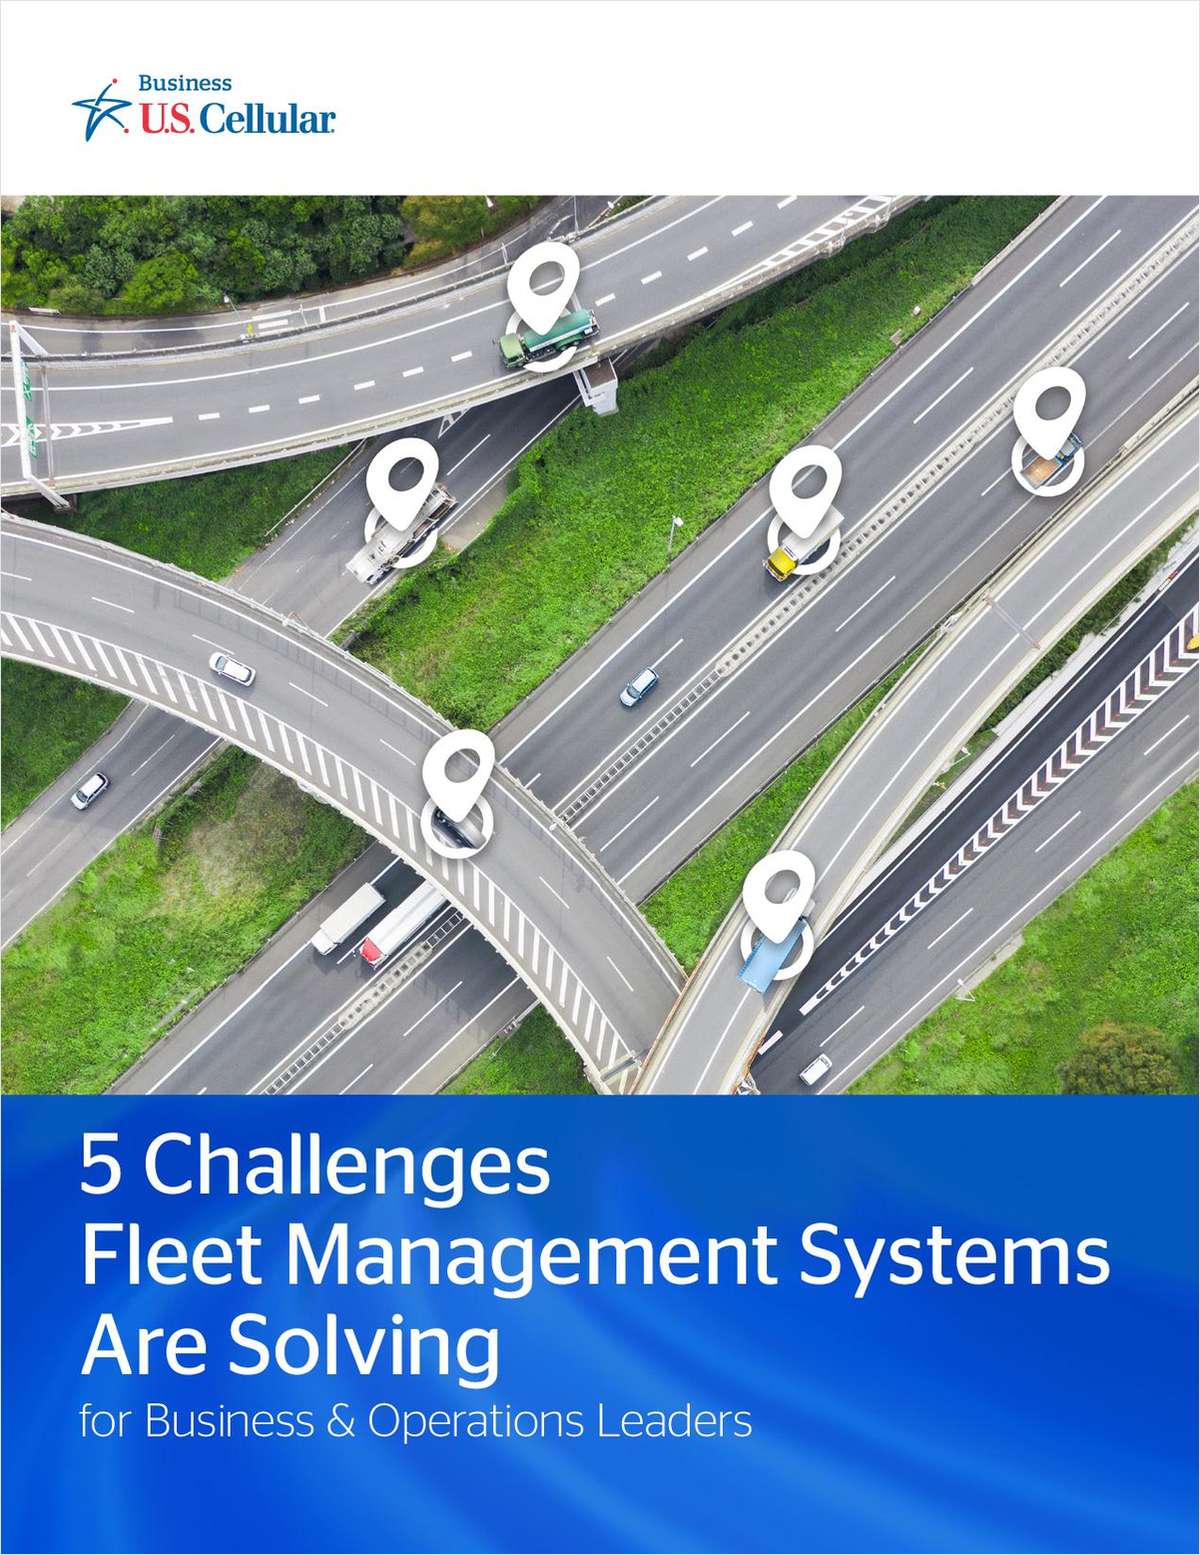 The 5 Challenges Fleet Management Systems Are Solving for Business and Operations Leaders